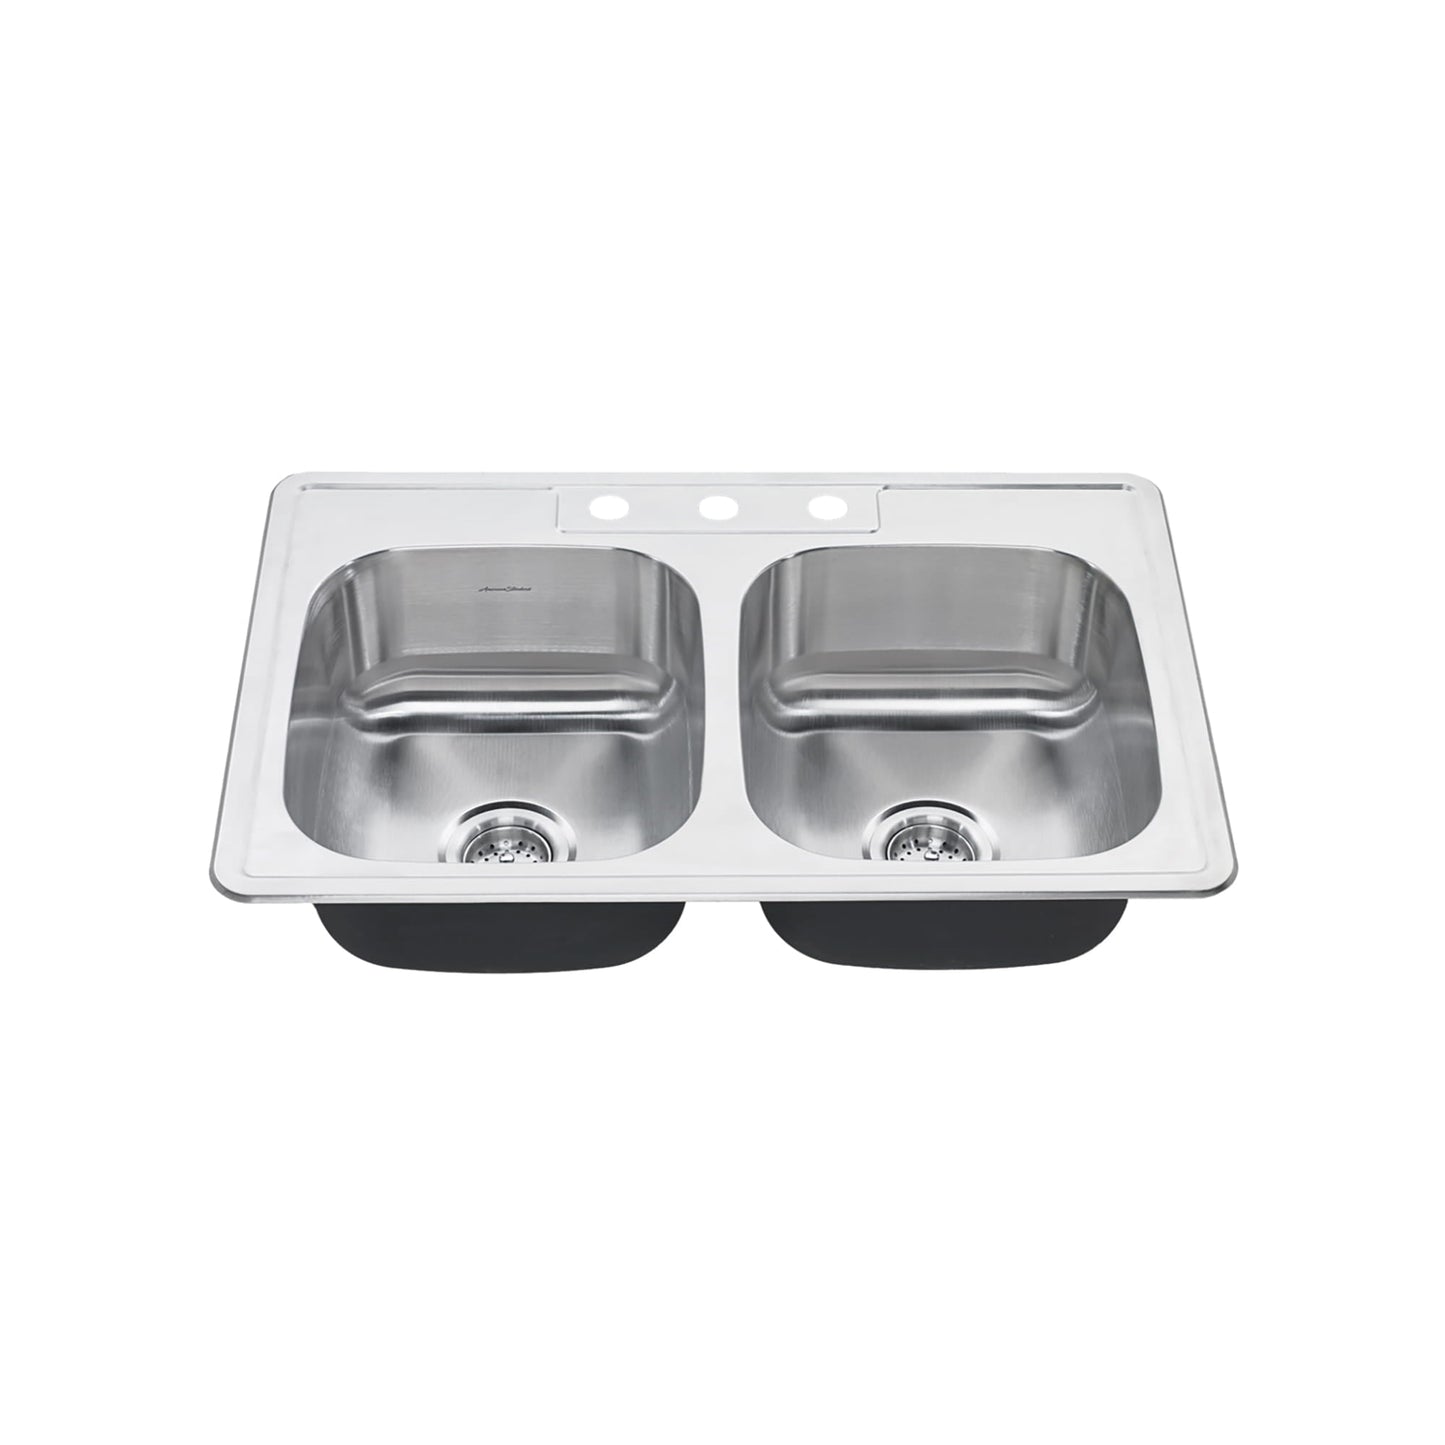 American Standard Colony® 33 x 22-Inch Stainless Steel 3-Hole Top Mount Double-Bowl ADA Kitchen Sink - 22DB.6332283S